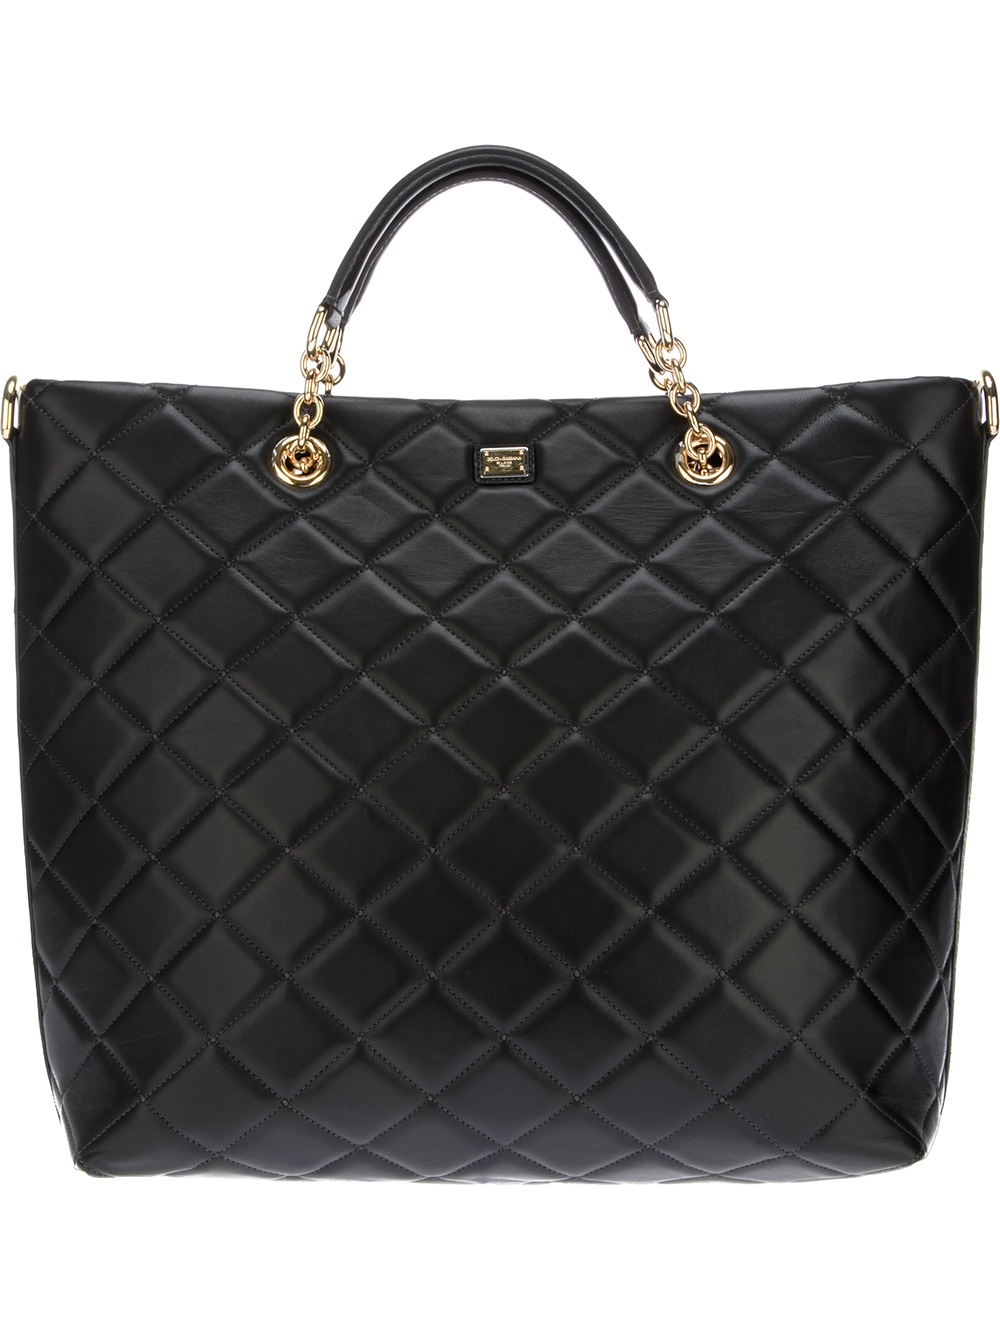 Dolce & Gabbana Quilted Tote in Black - Lyst